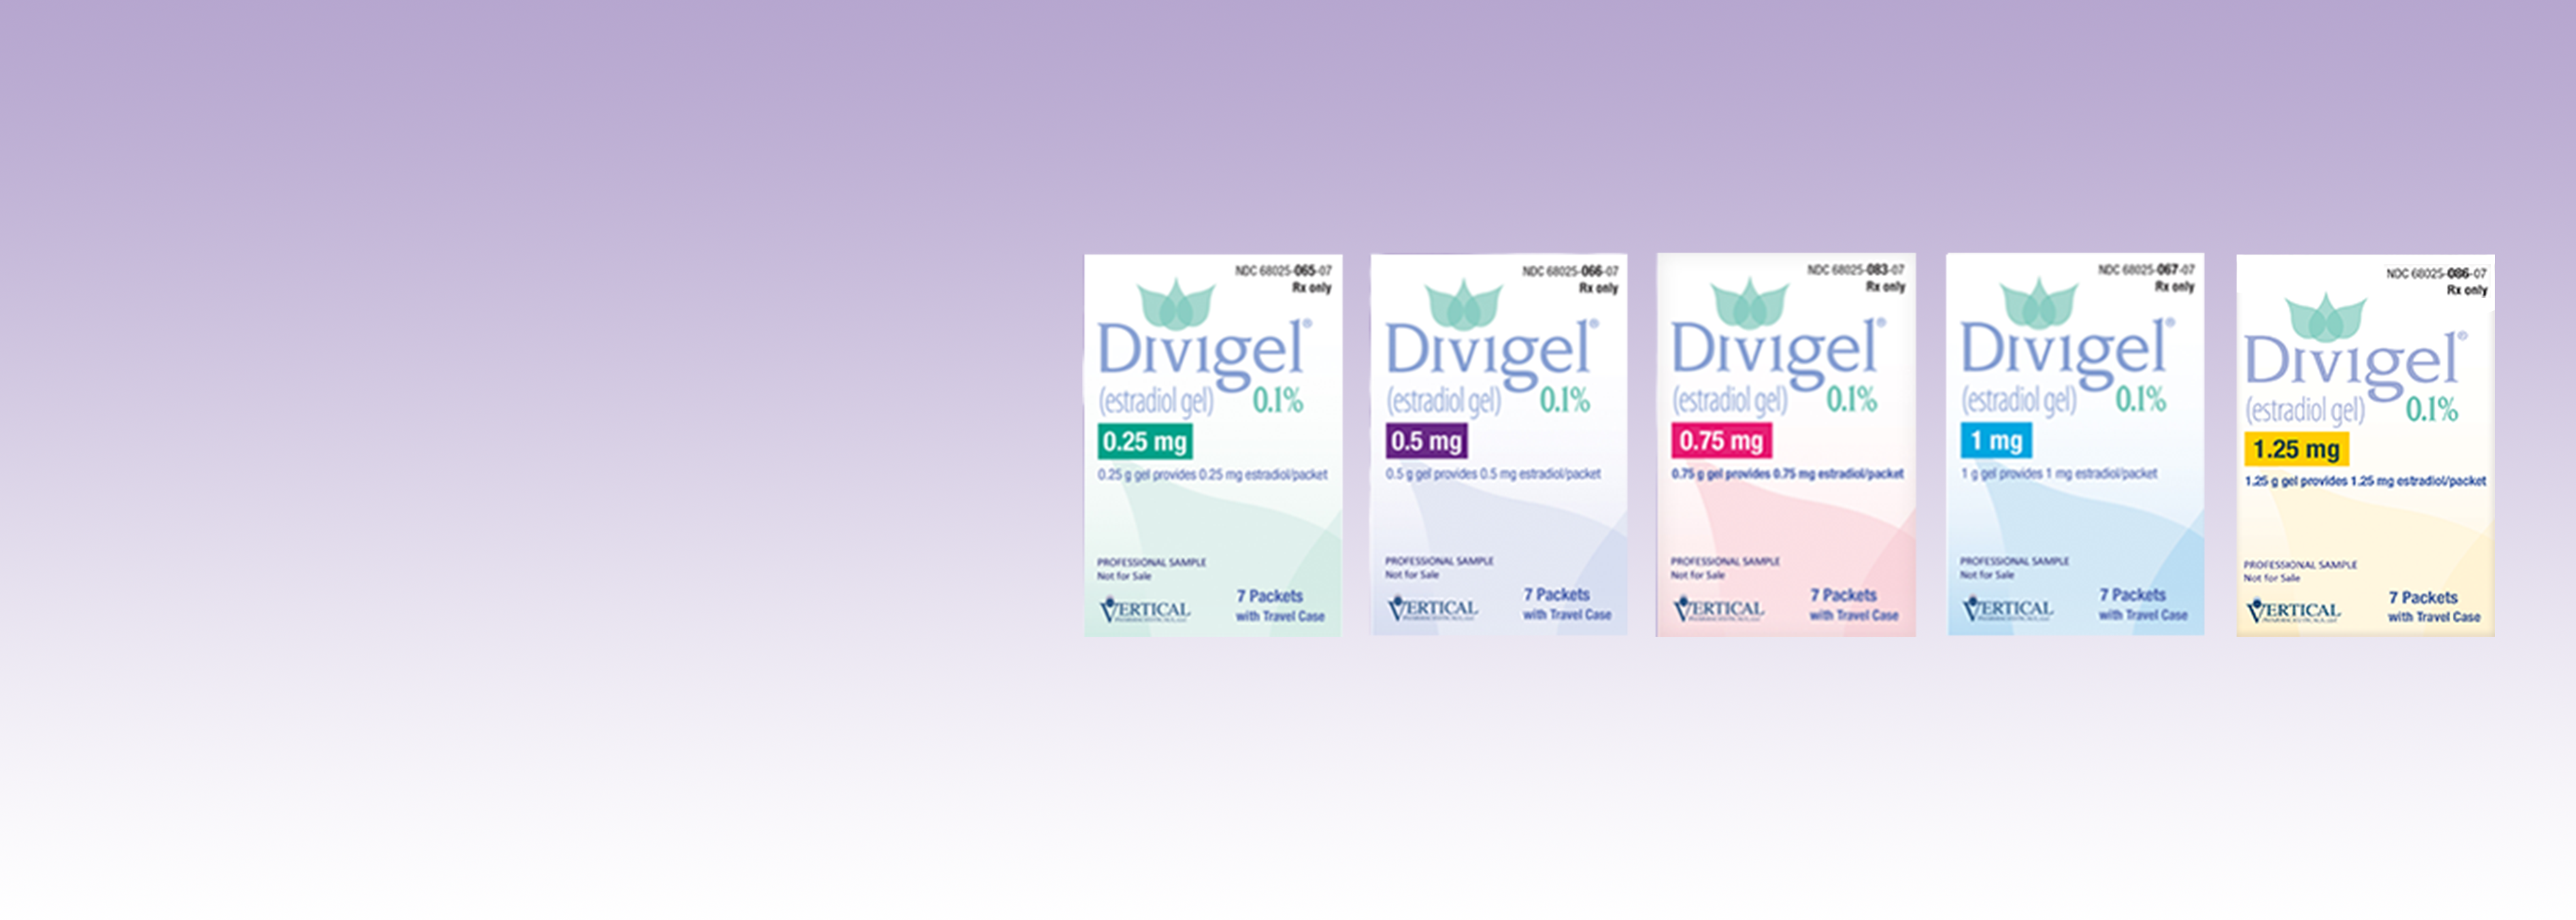 Divigel® comes in 0.25 mg, 0.5 mg, 0.75 mg, 1 mg and 1.25 mg.